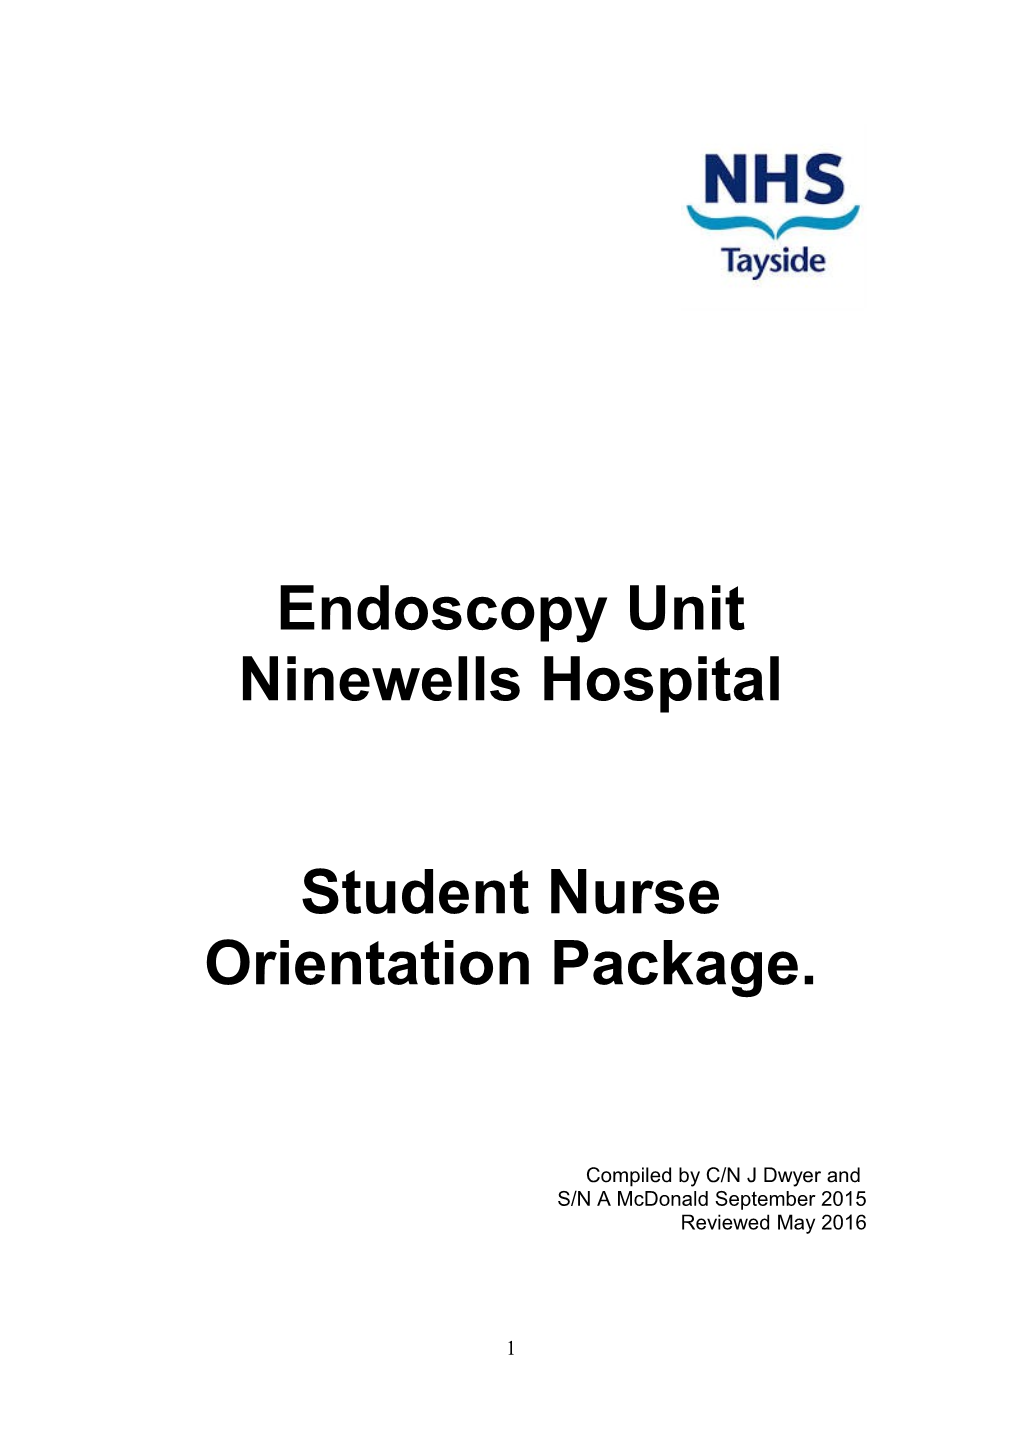 Welcome to the Endoscopy Unit, Ninewells